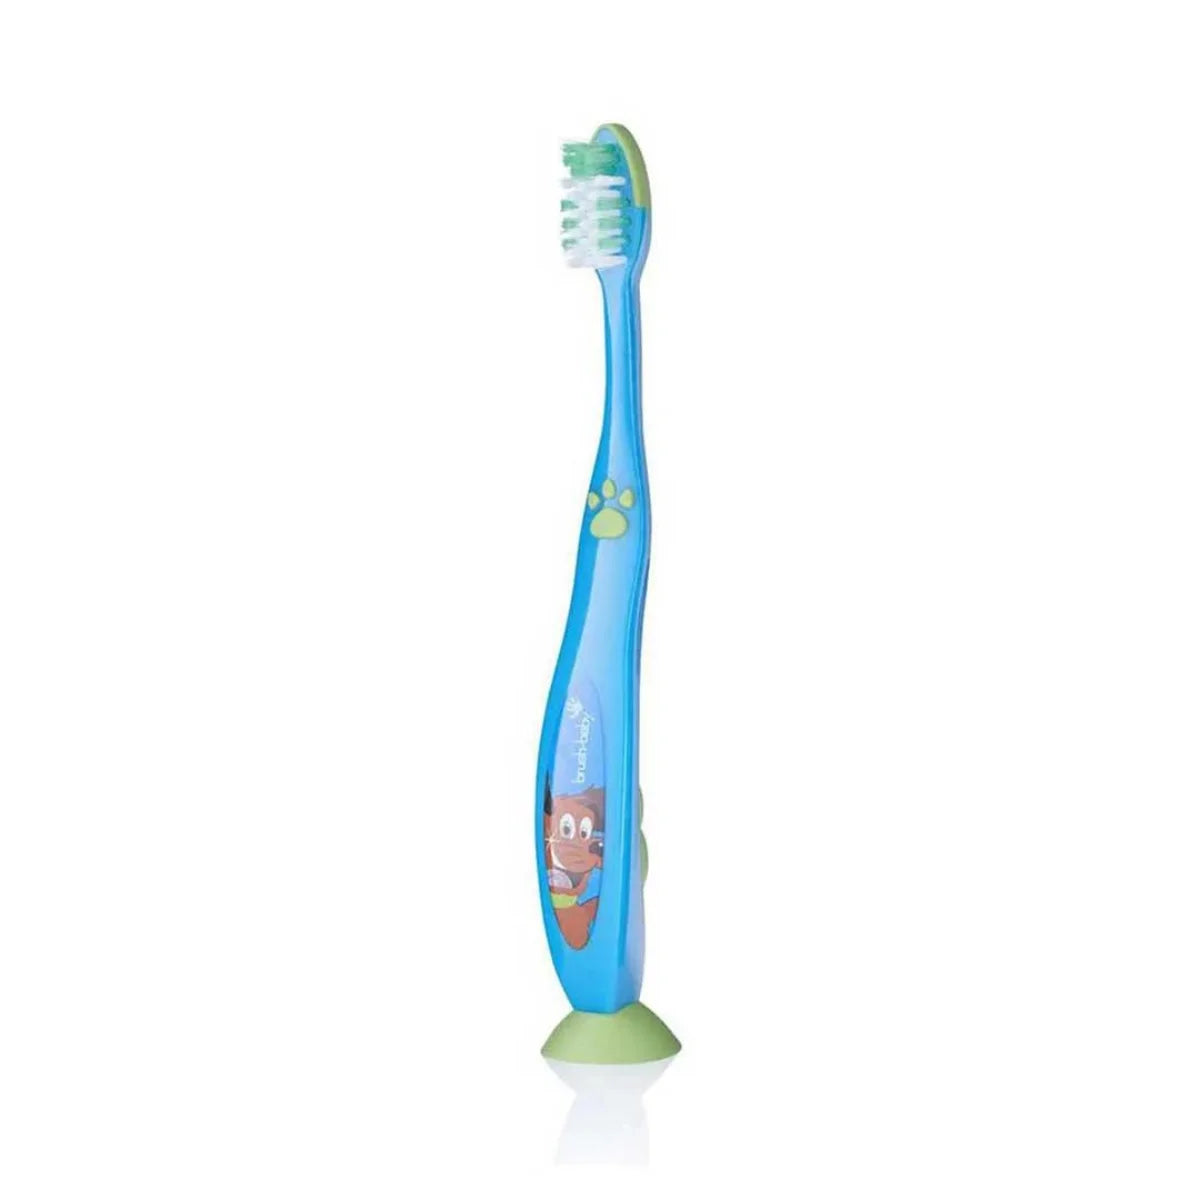 6+ year flossbrush bristles toothbrush for children with sucker feet and deep clean bristles